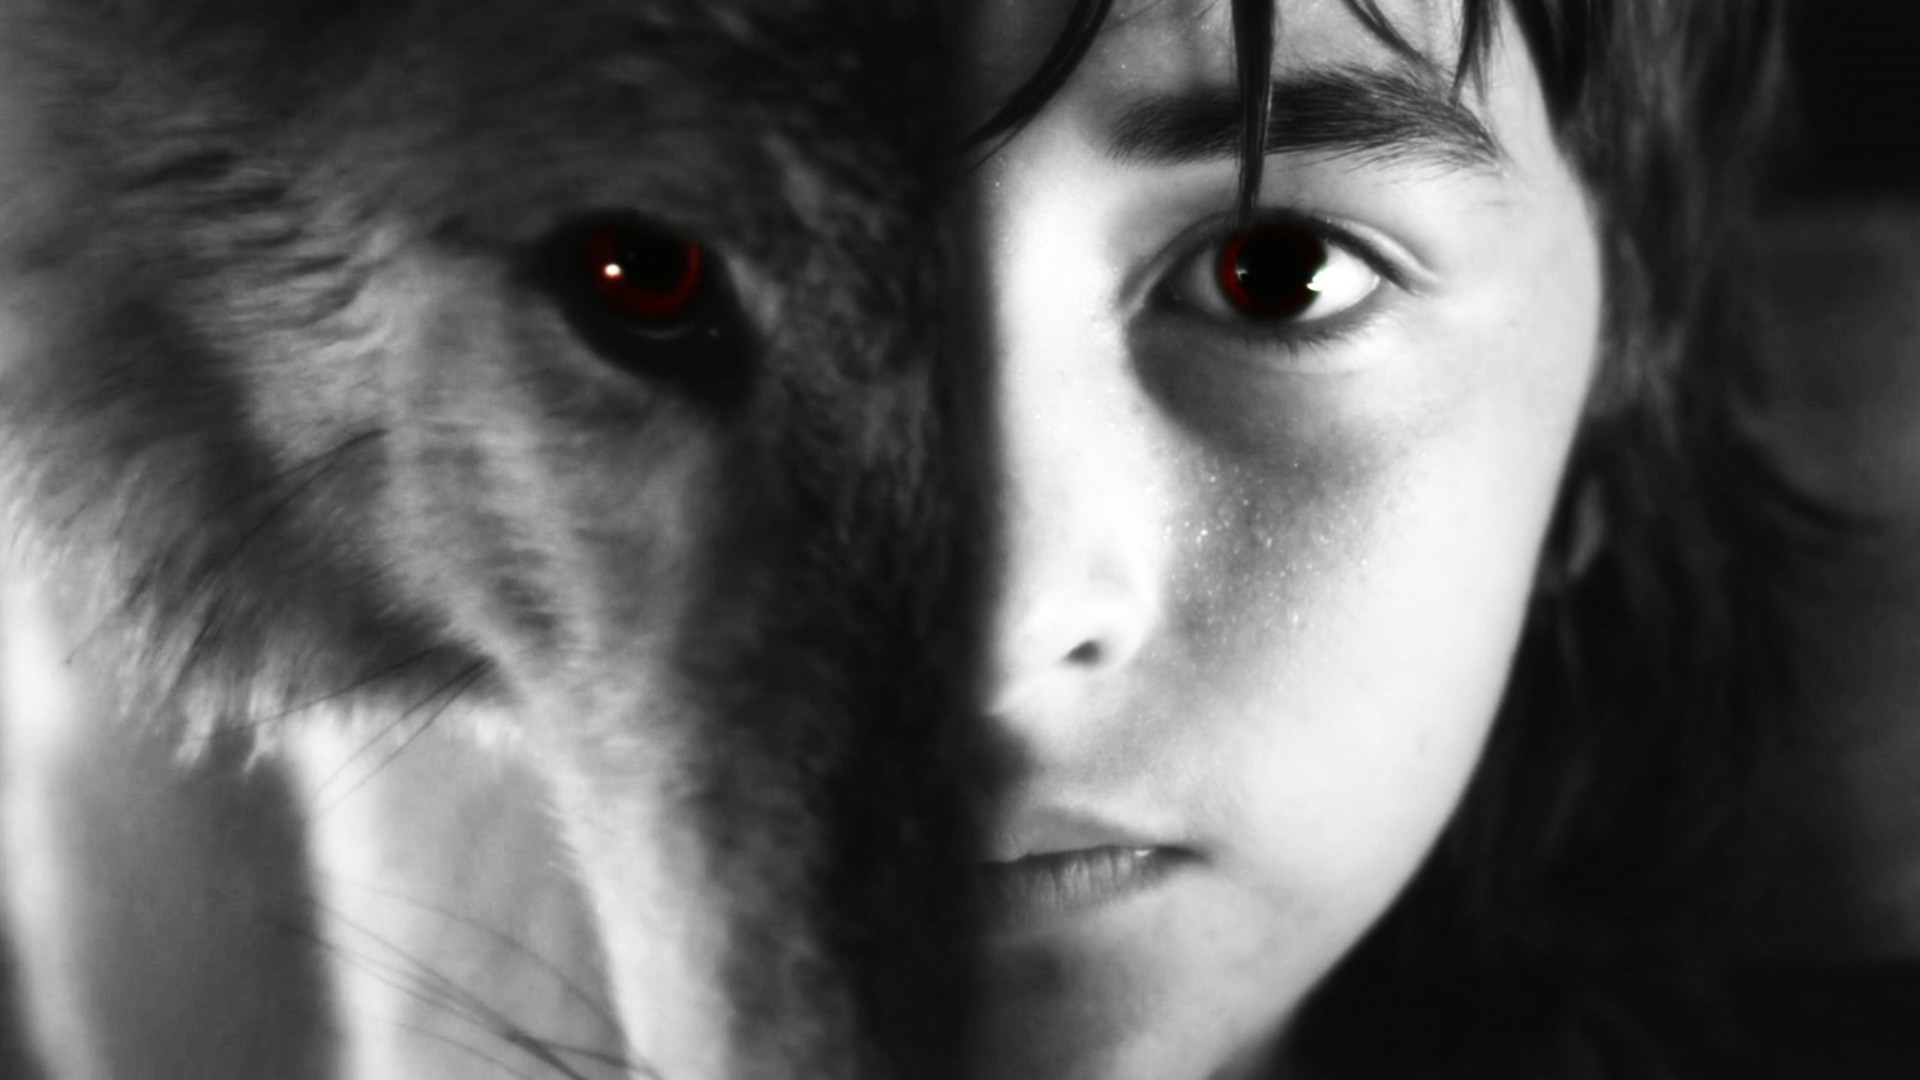 General 1920x1080 Game of Thrones direwolves Brandon Stark selective coloring Isaac Hempstead Wright